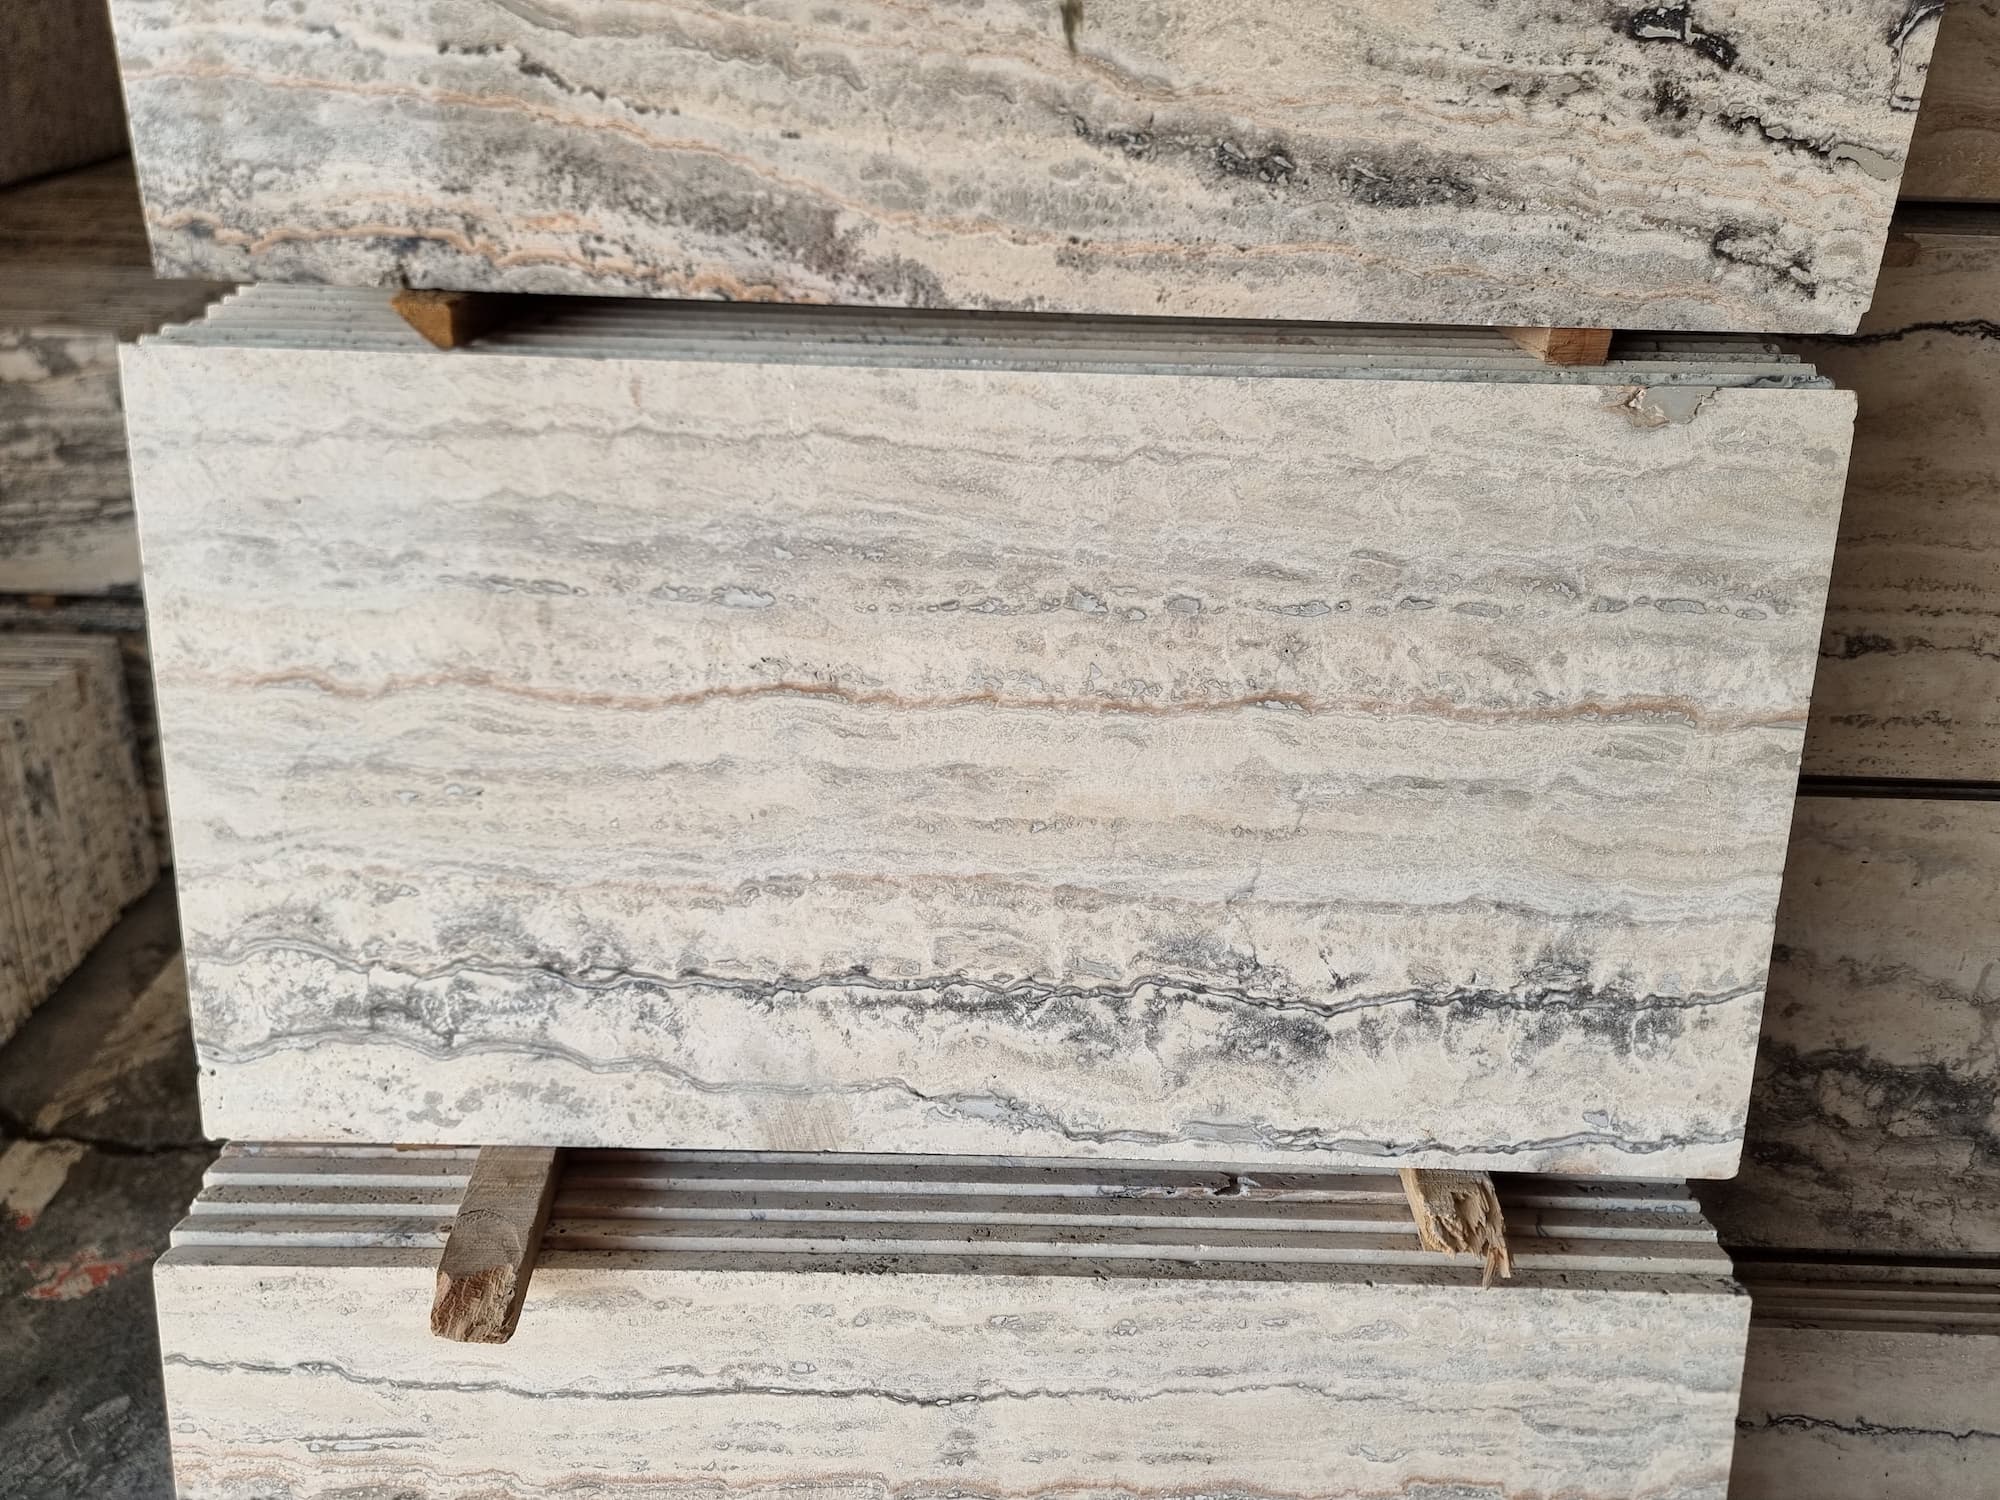 Where does silver travertine come from